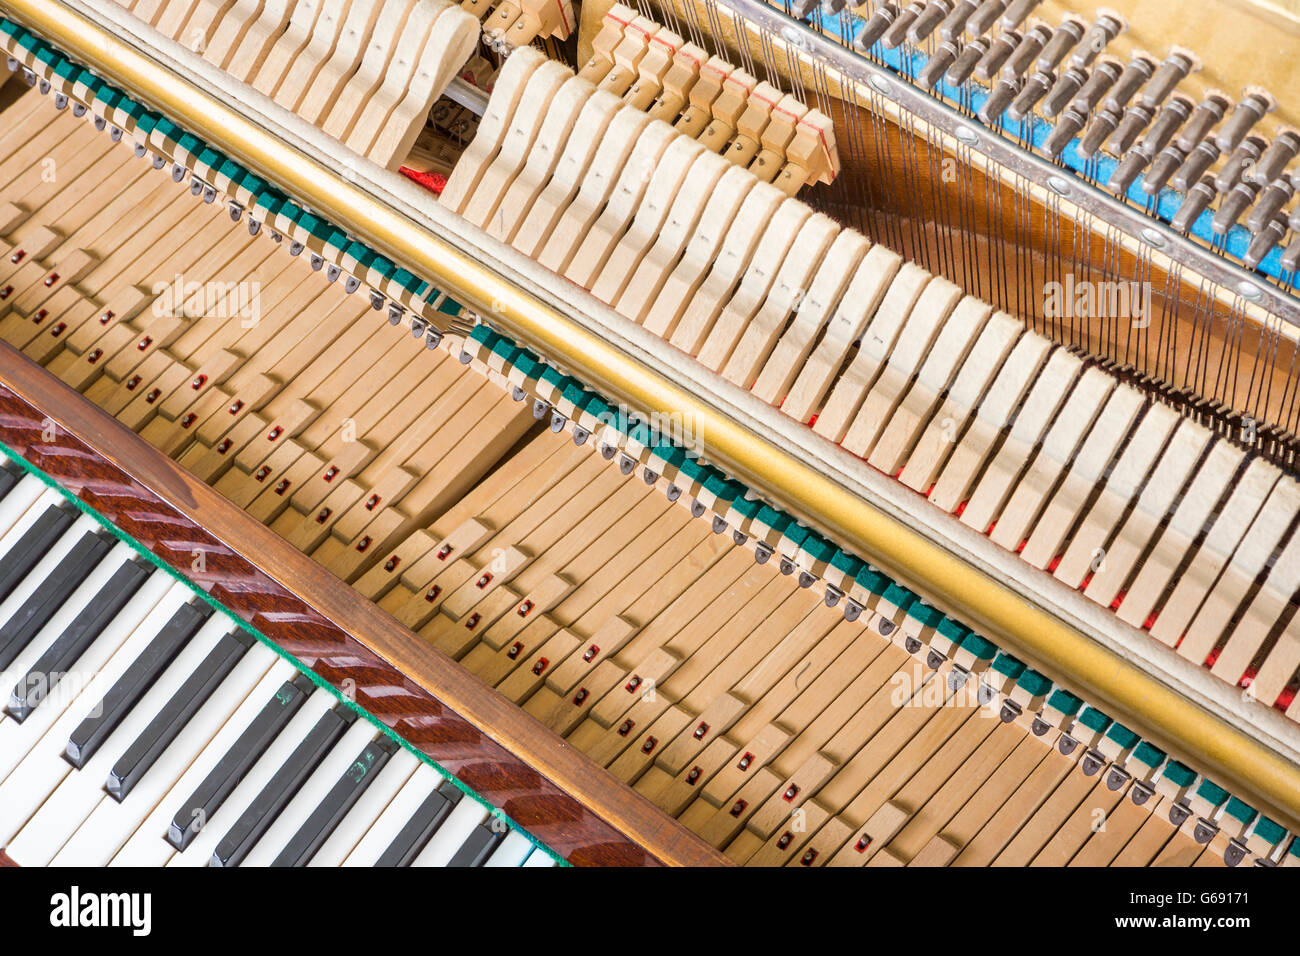 Action mechanics close up inside of an upright piano. Pattern of keys, shanks, hammers and strings. Stock Photo